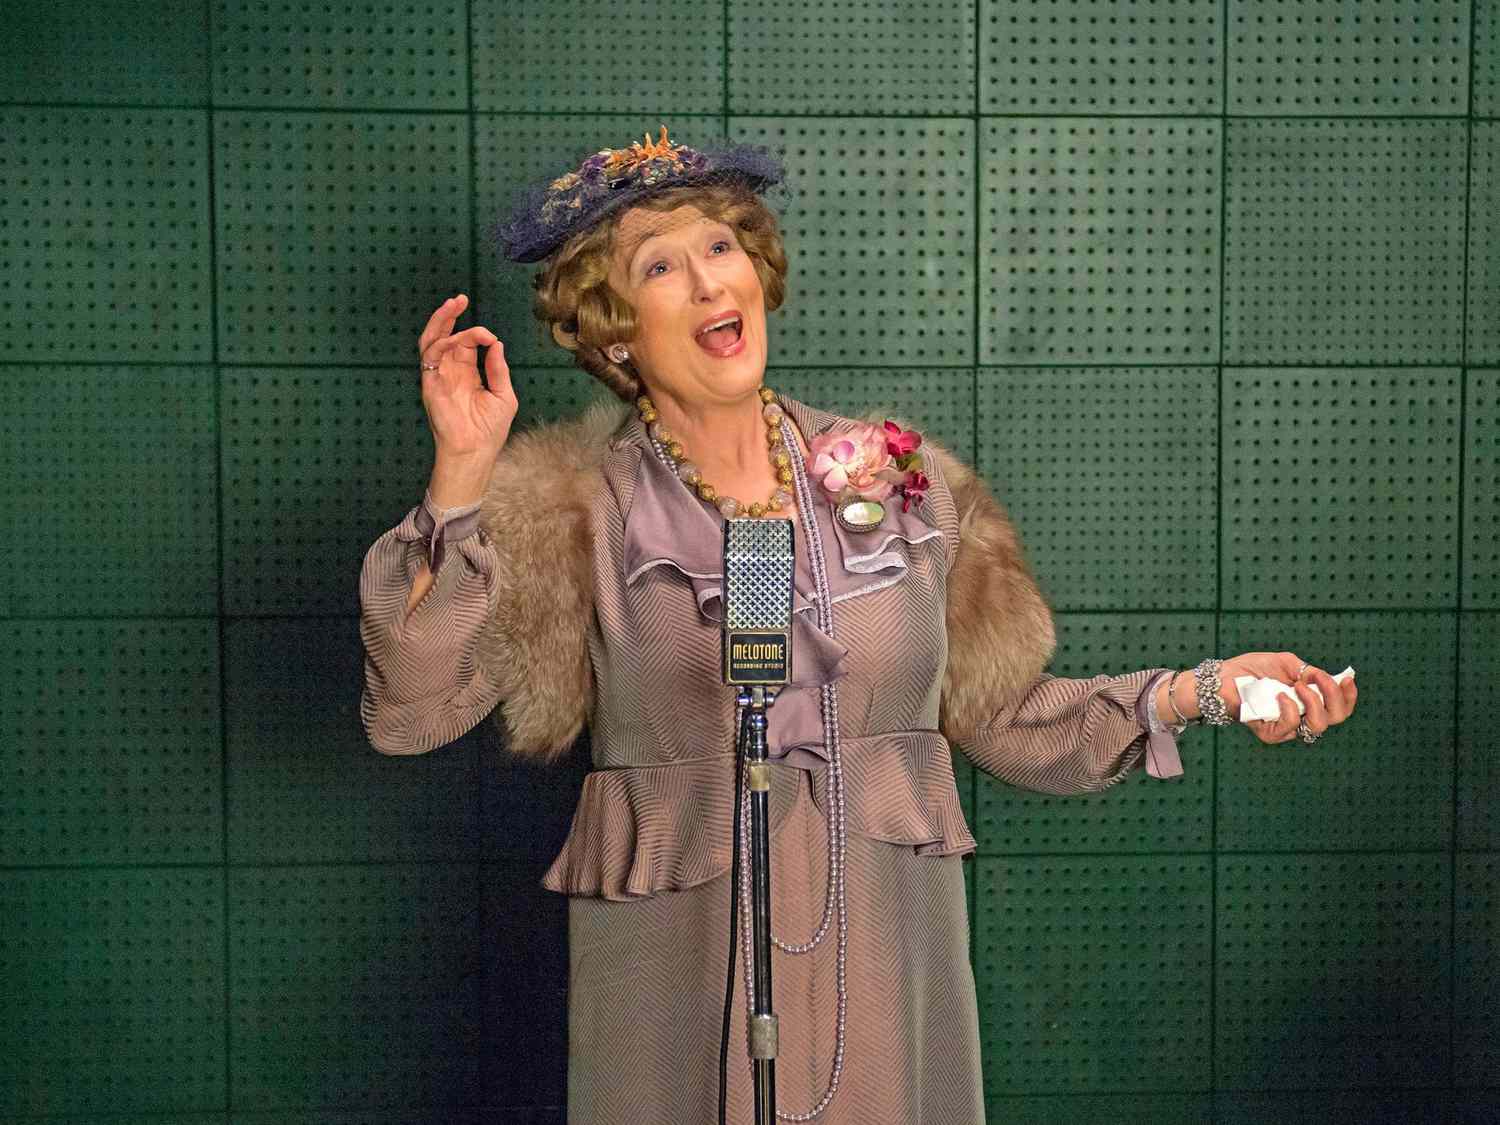 Florence Foster Jenkins&nbsp;based on&nbsp;Florence Foster Jenkins: The Life of the World's Worst Opera Singer by Nicholas Martin and Jasper Rees